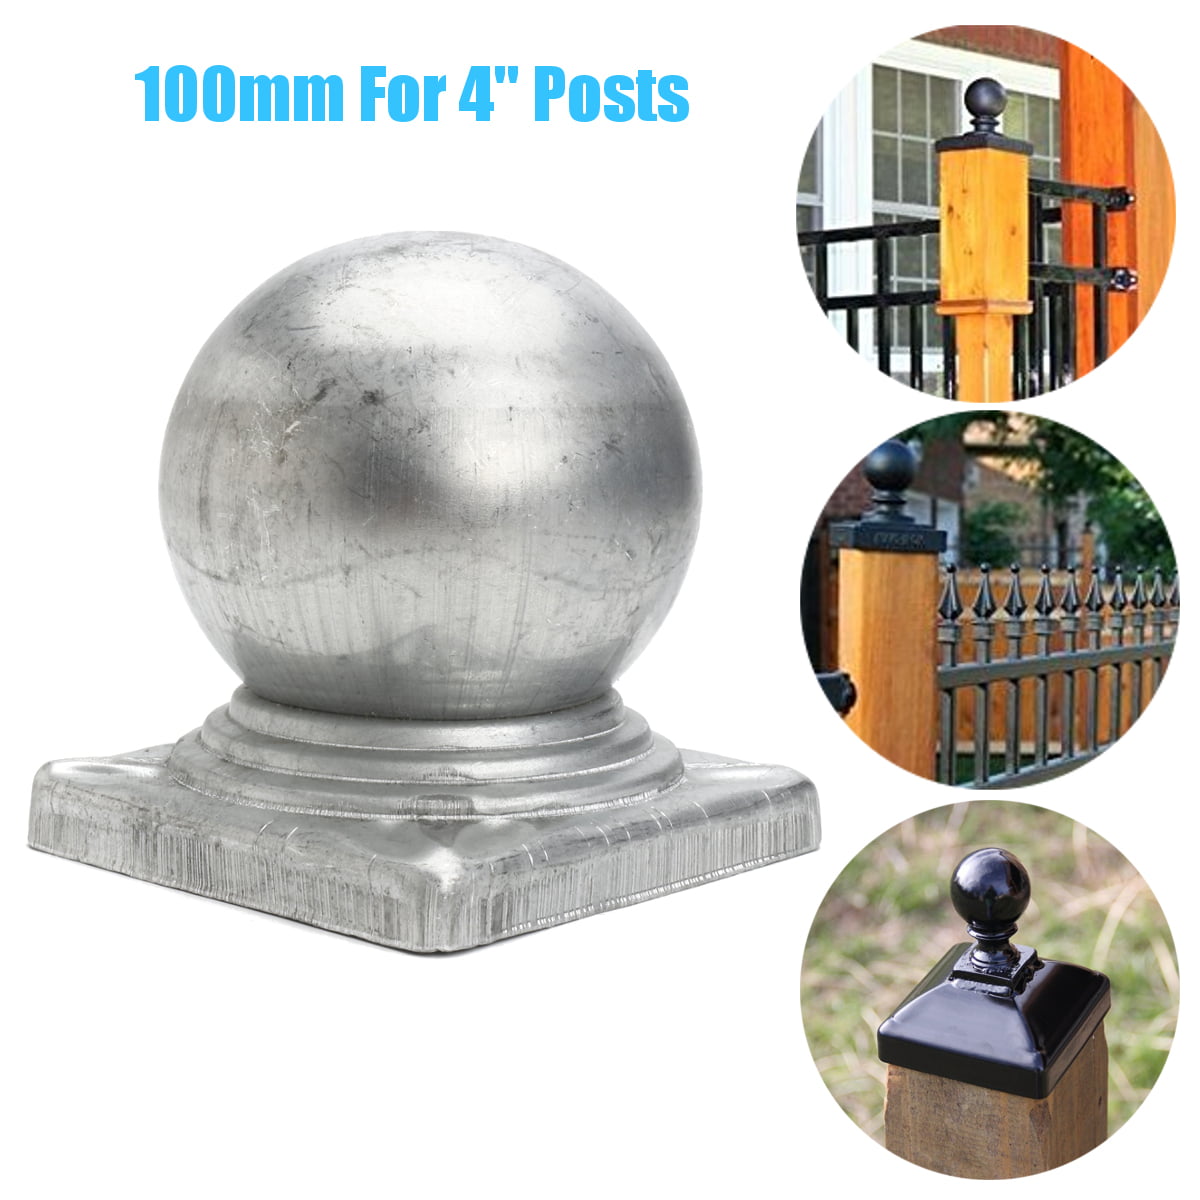 For 4" Posts 100mm Galvanised Metal Round Ball Fence Finial Post Caps